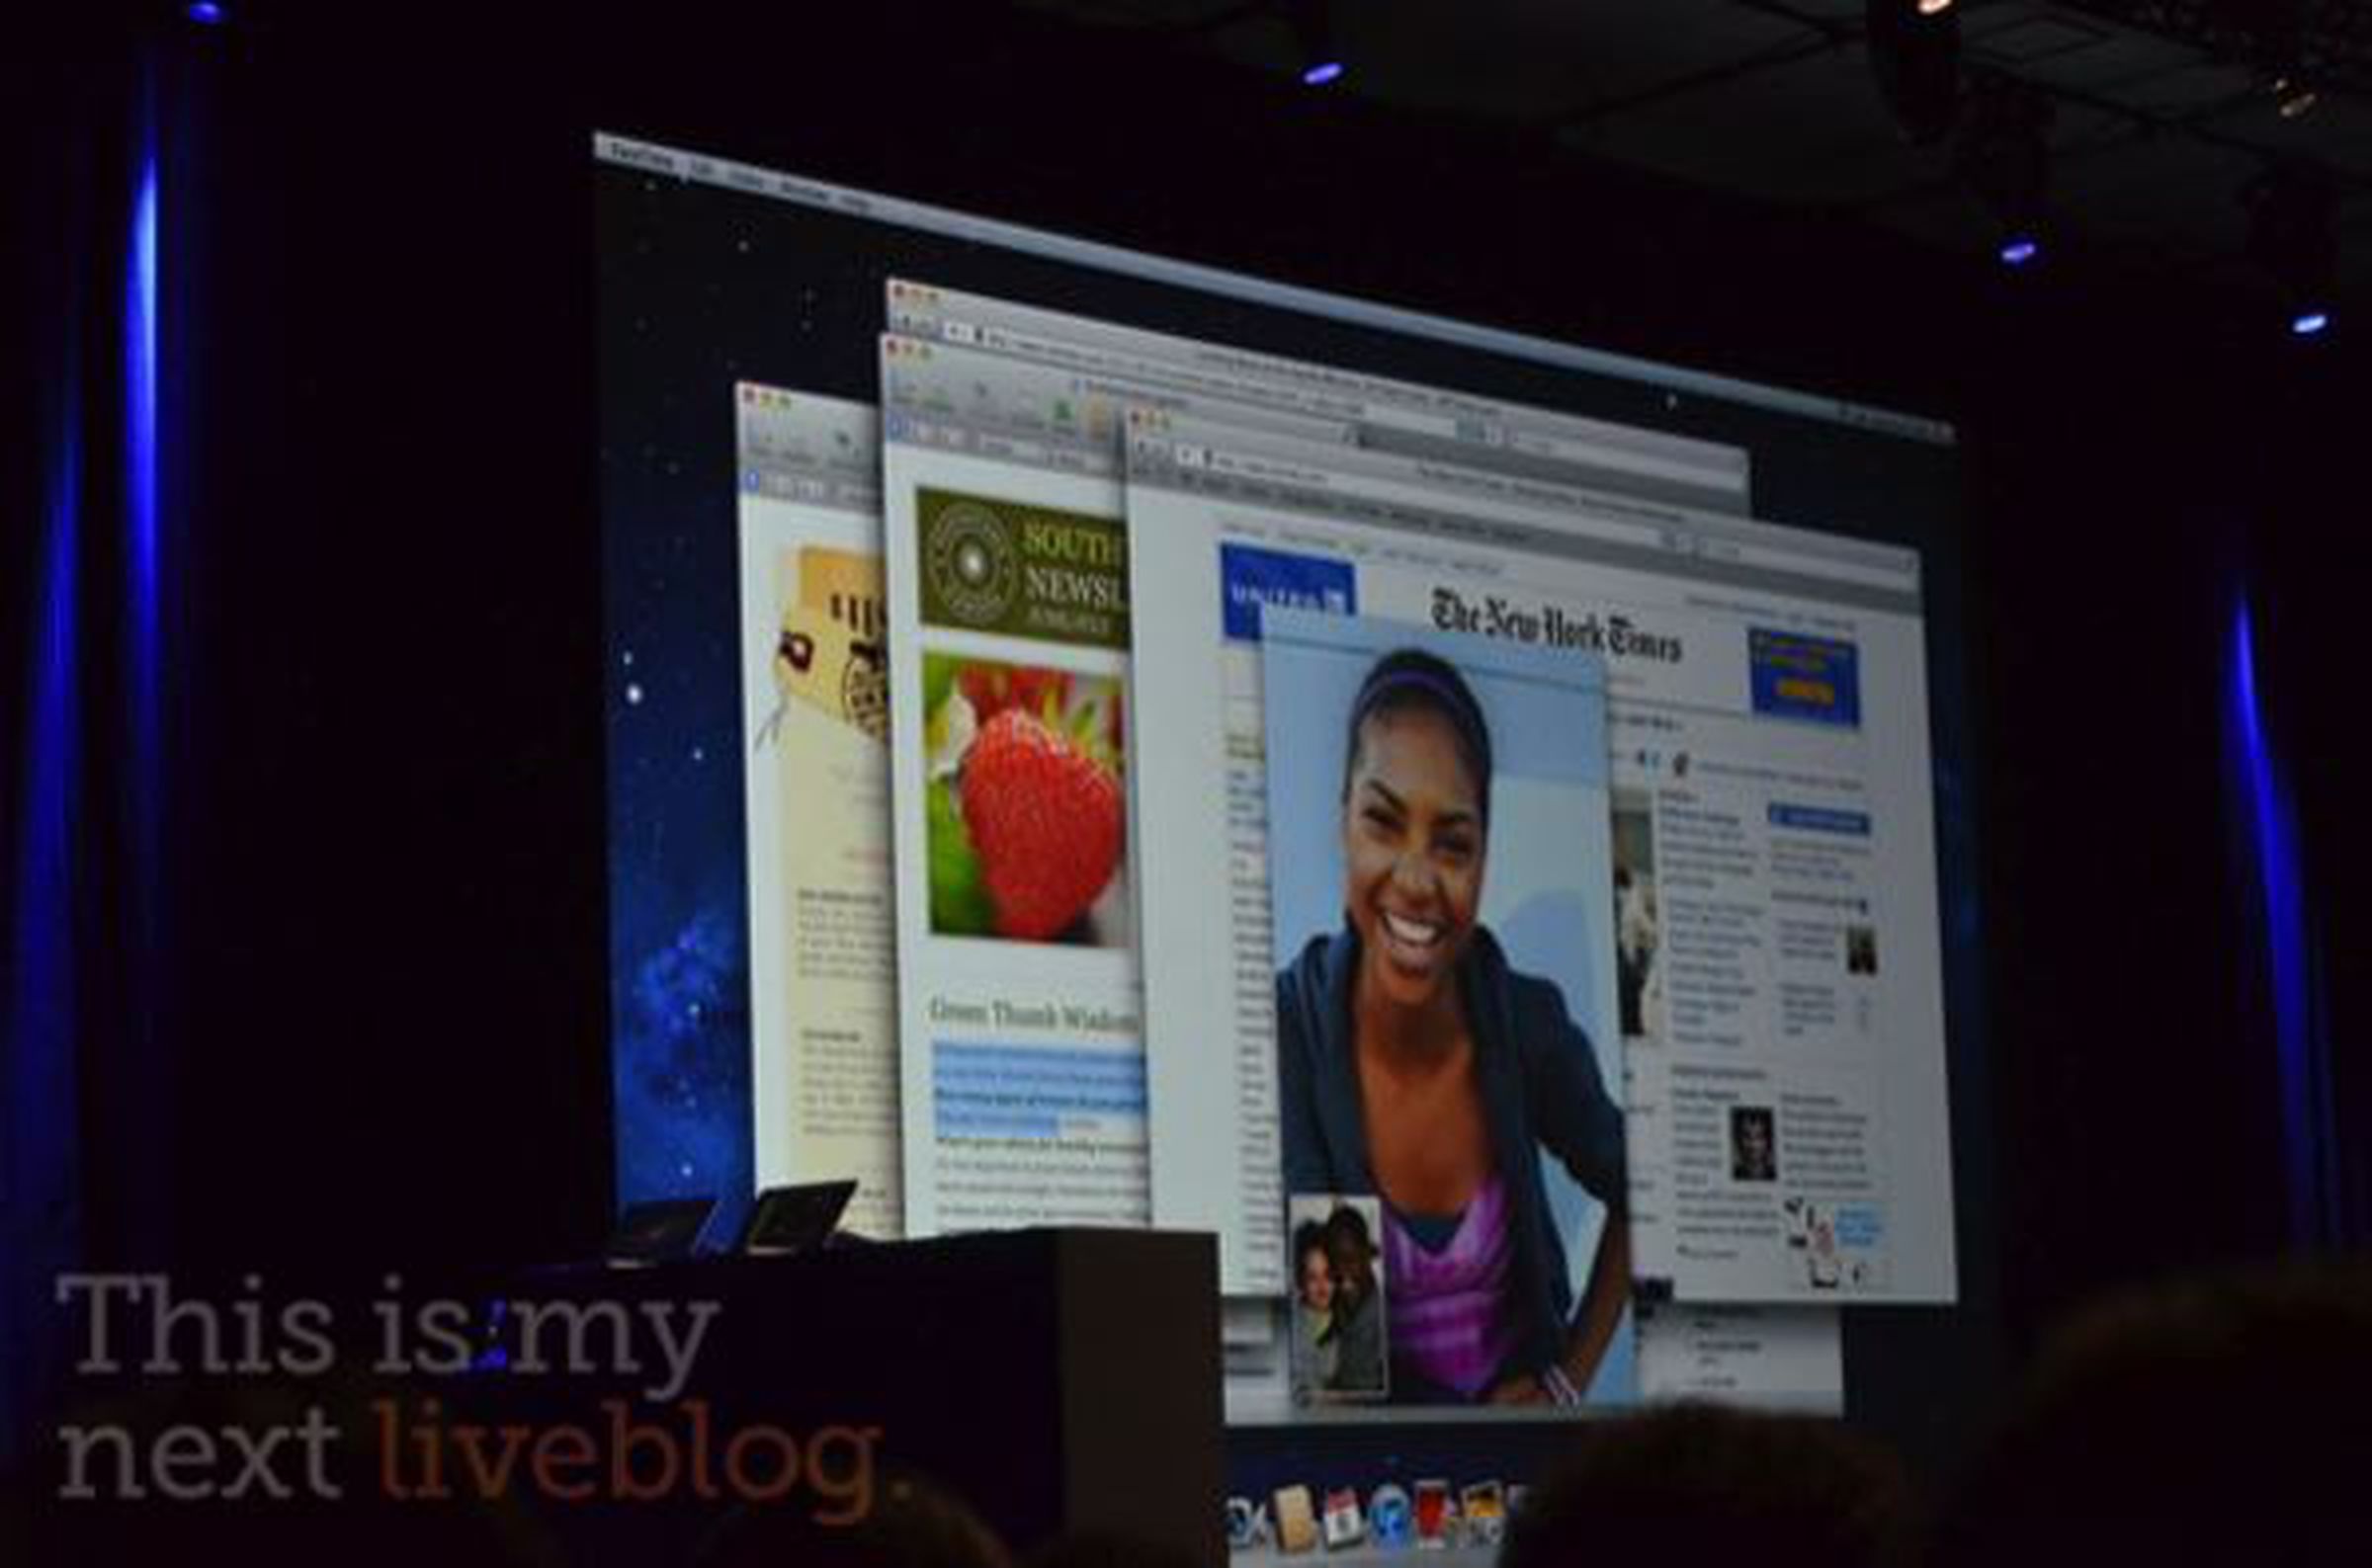 Apple makes Mac OS X Lion available in the Mac App Store for $29.99